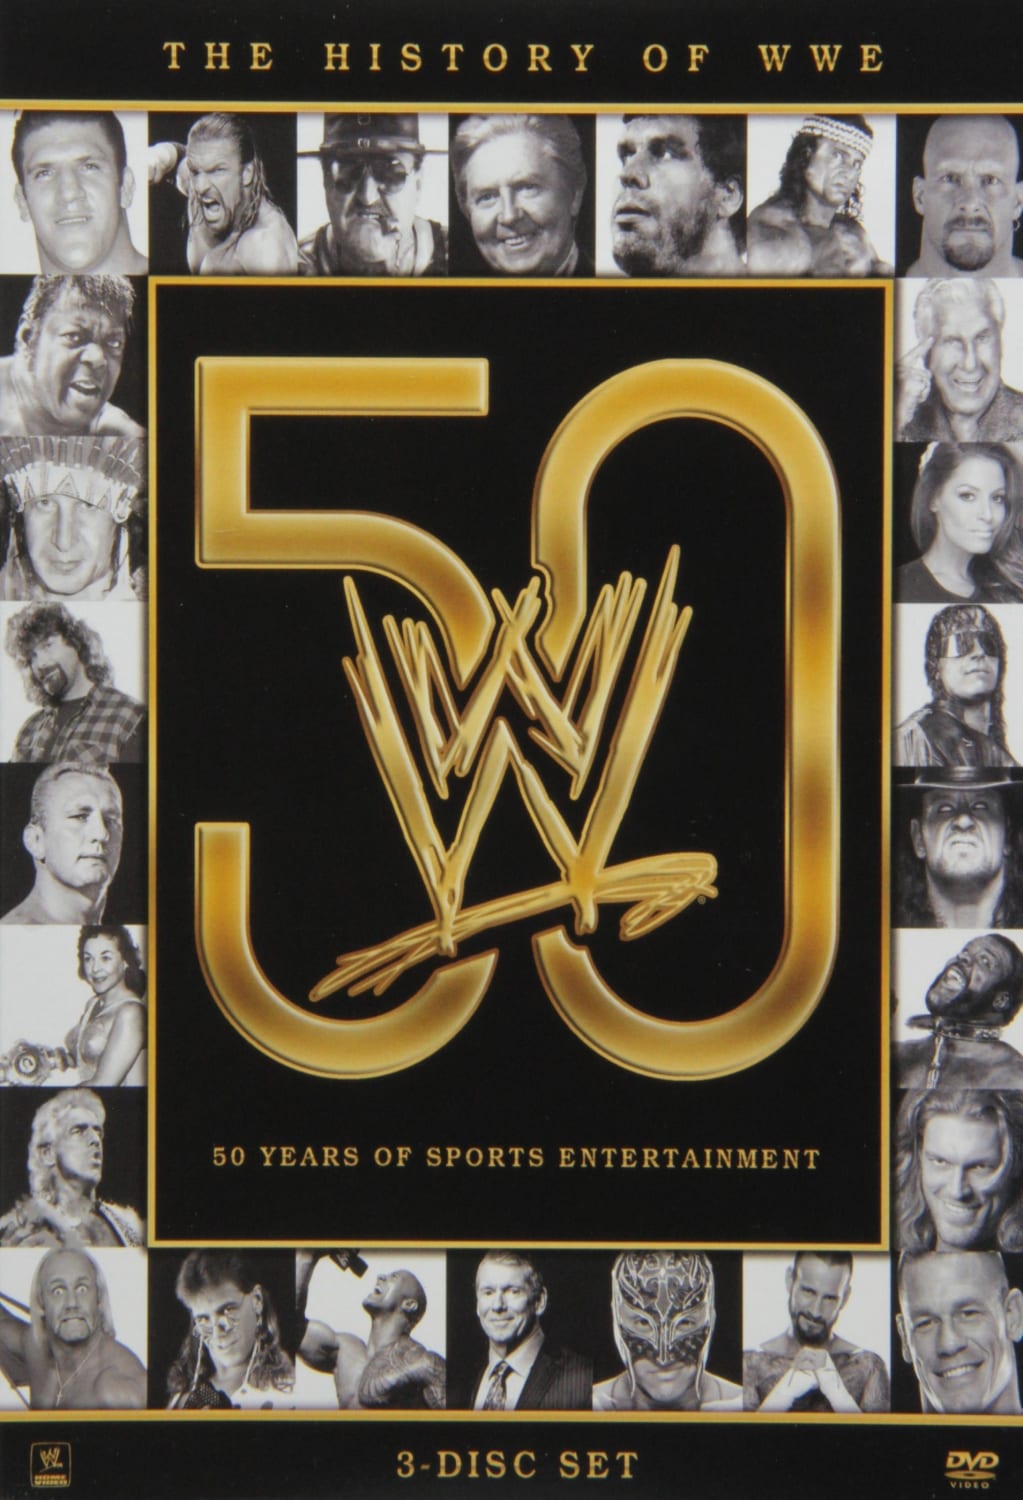 The History of WWE (DVD) on MovieShack